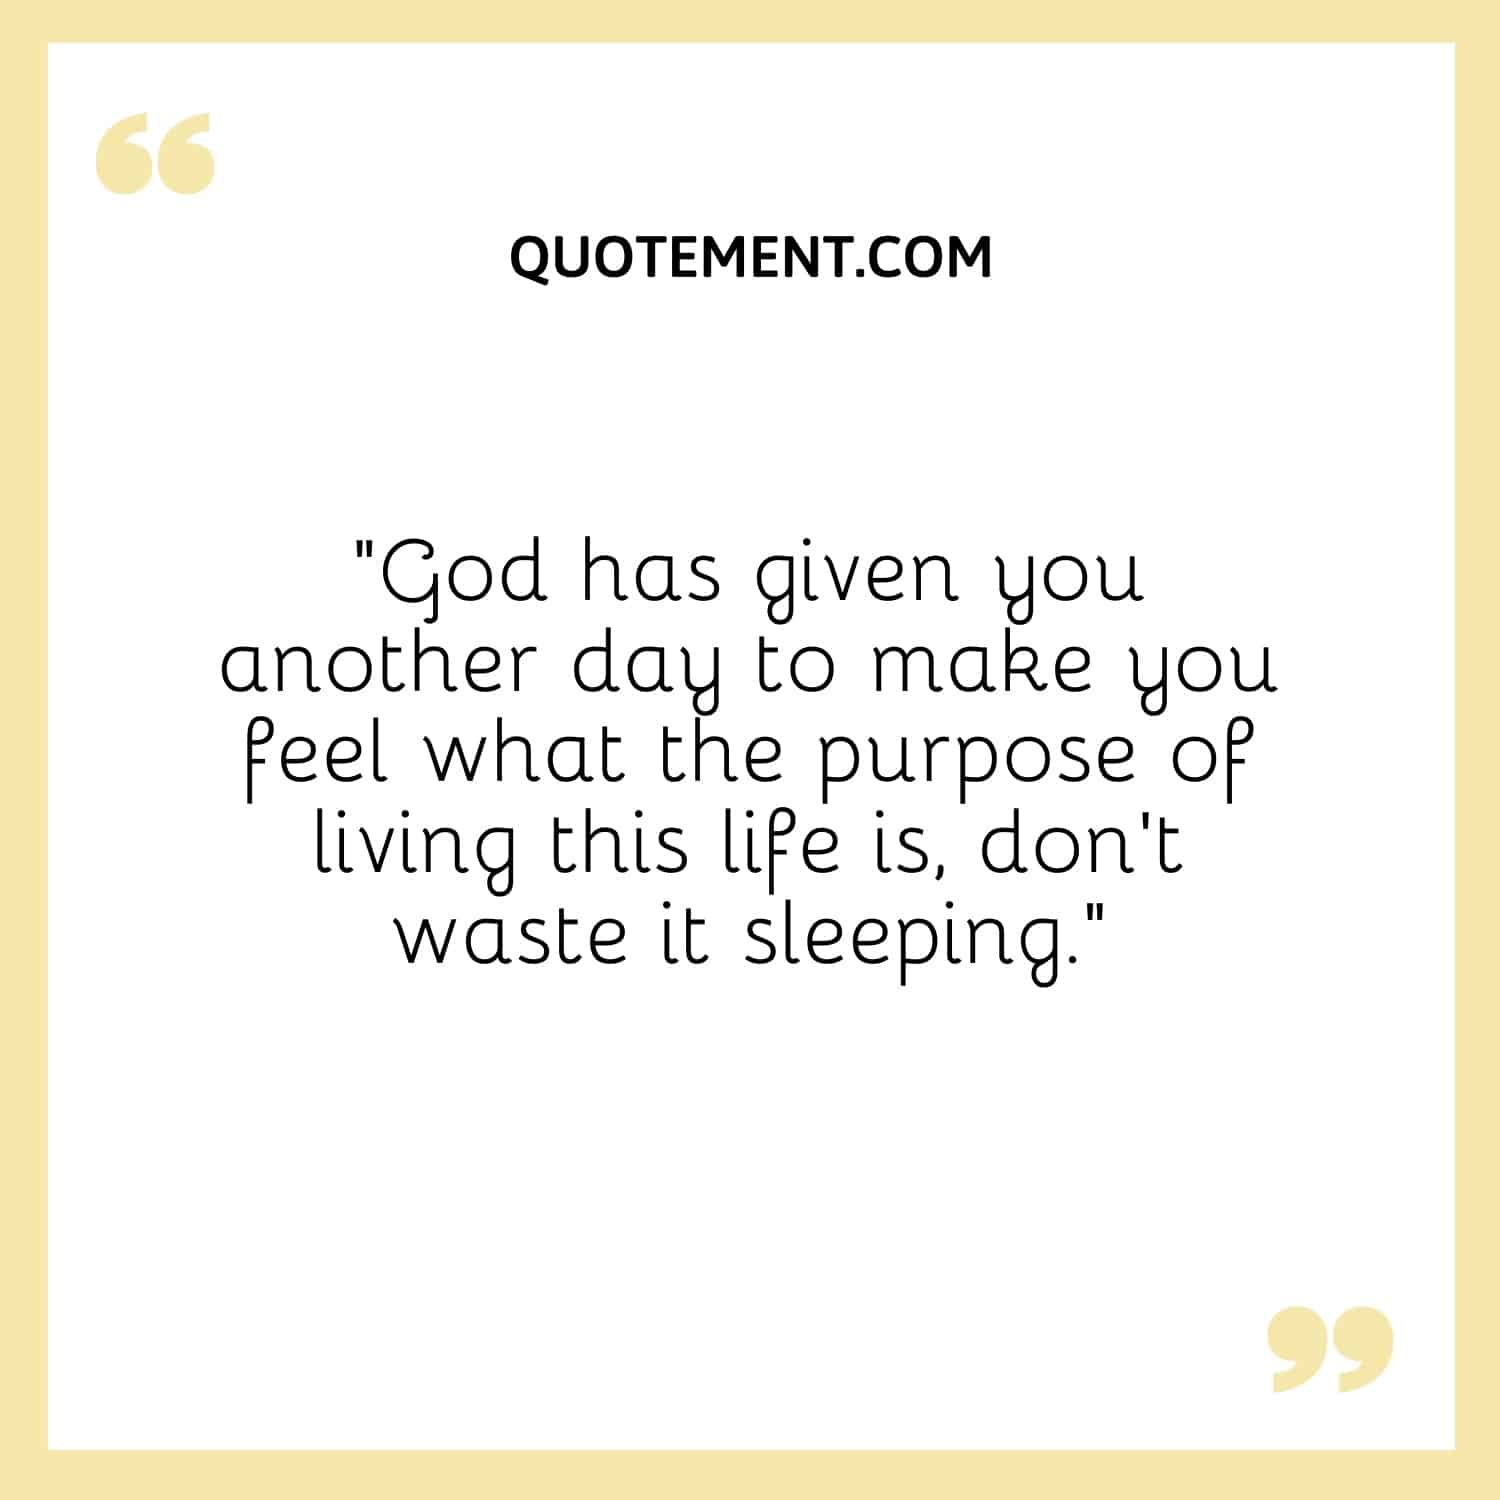 God has given you another day to make you feel what the purpose